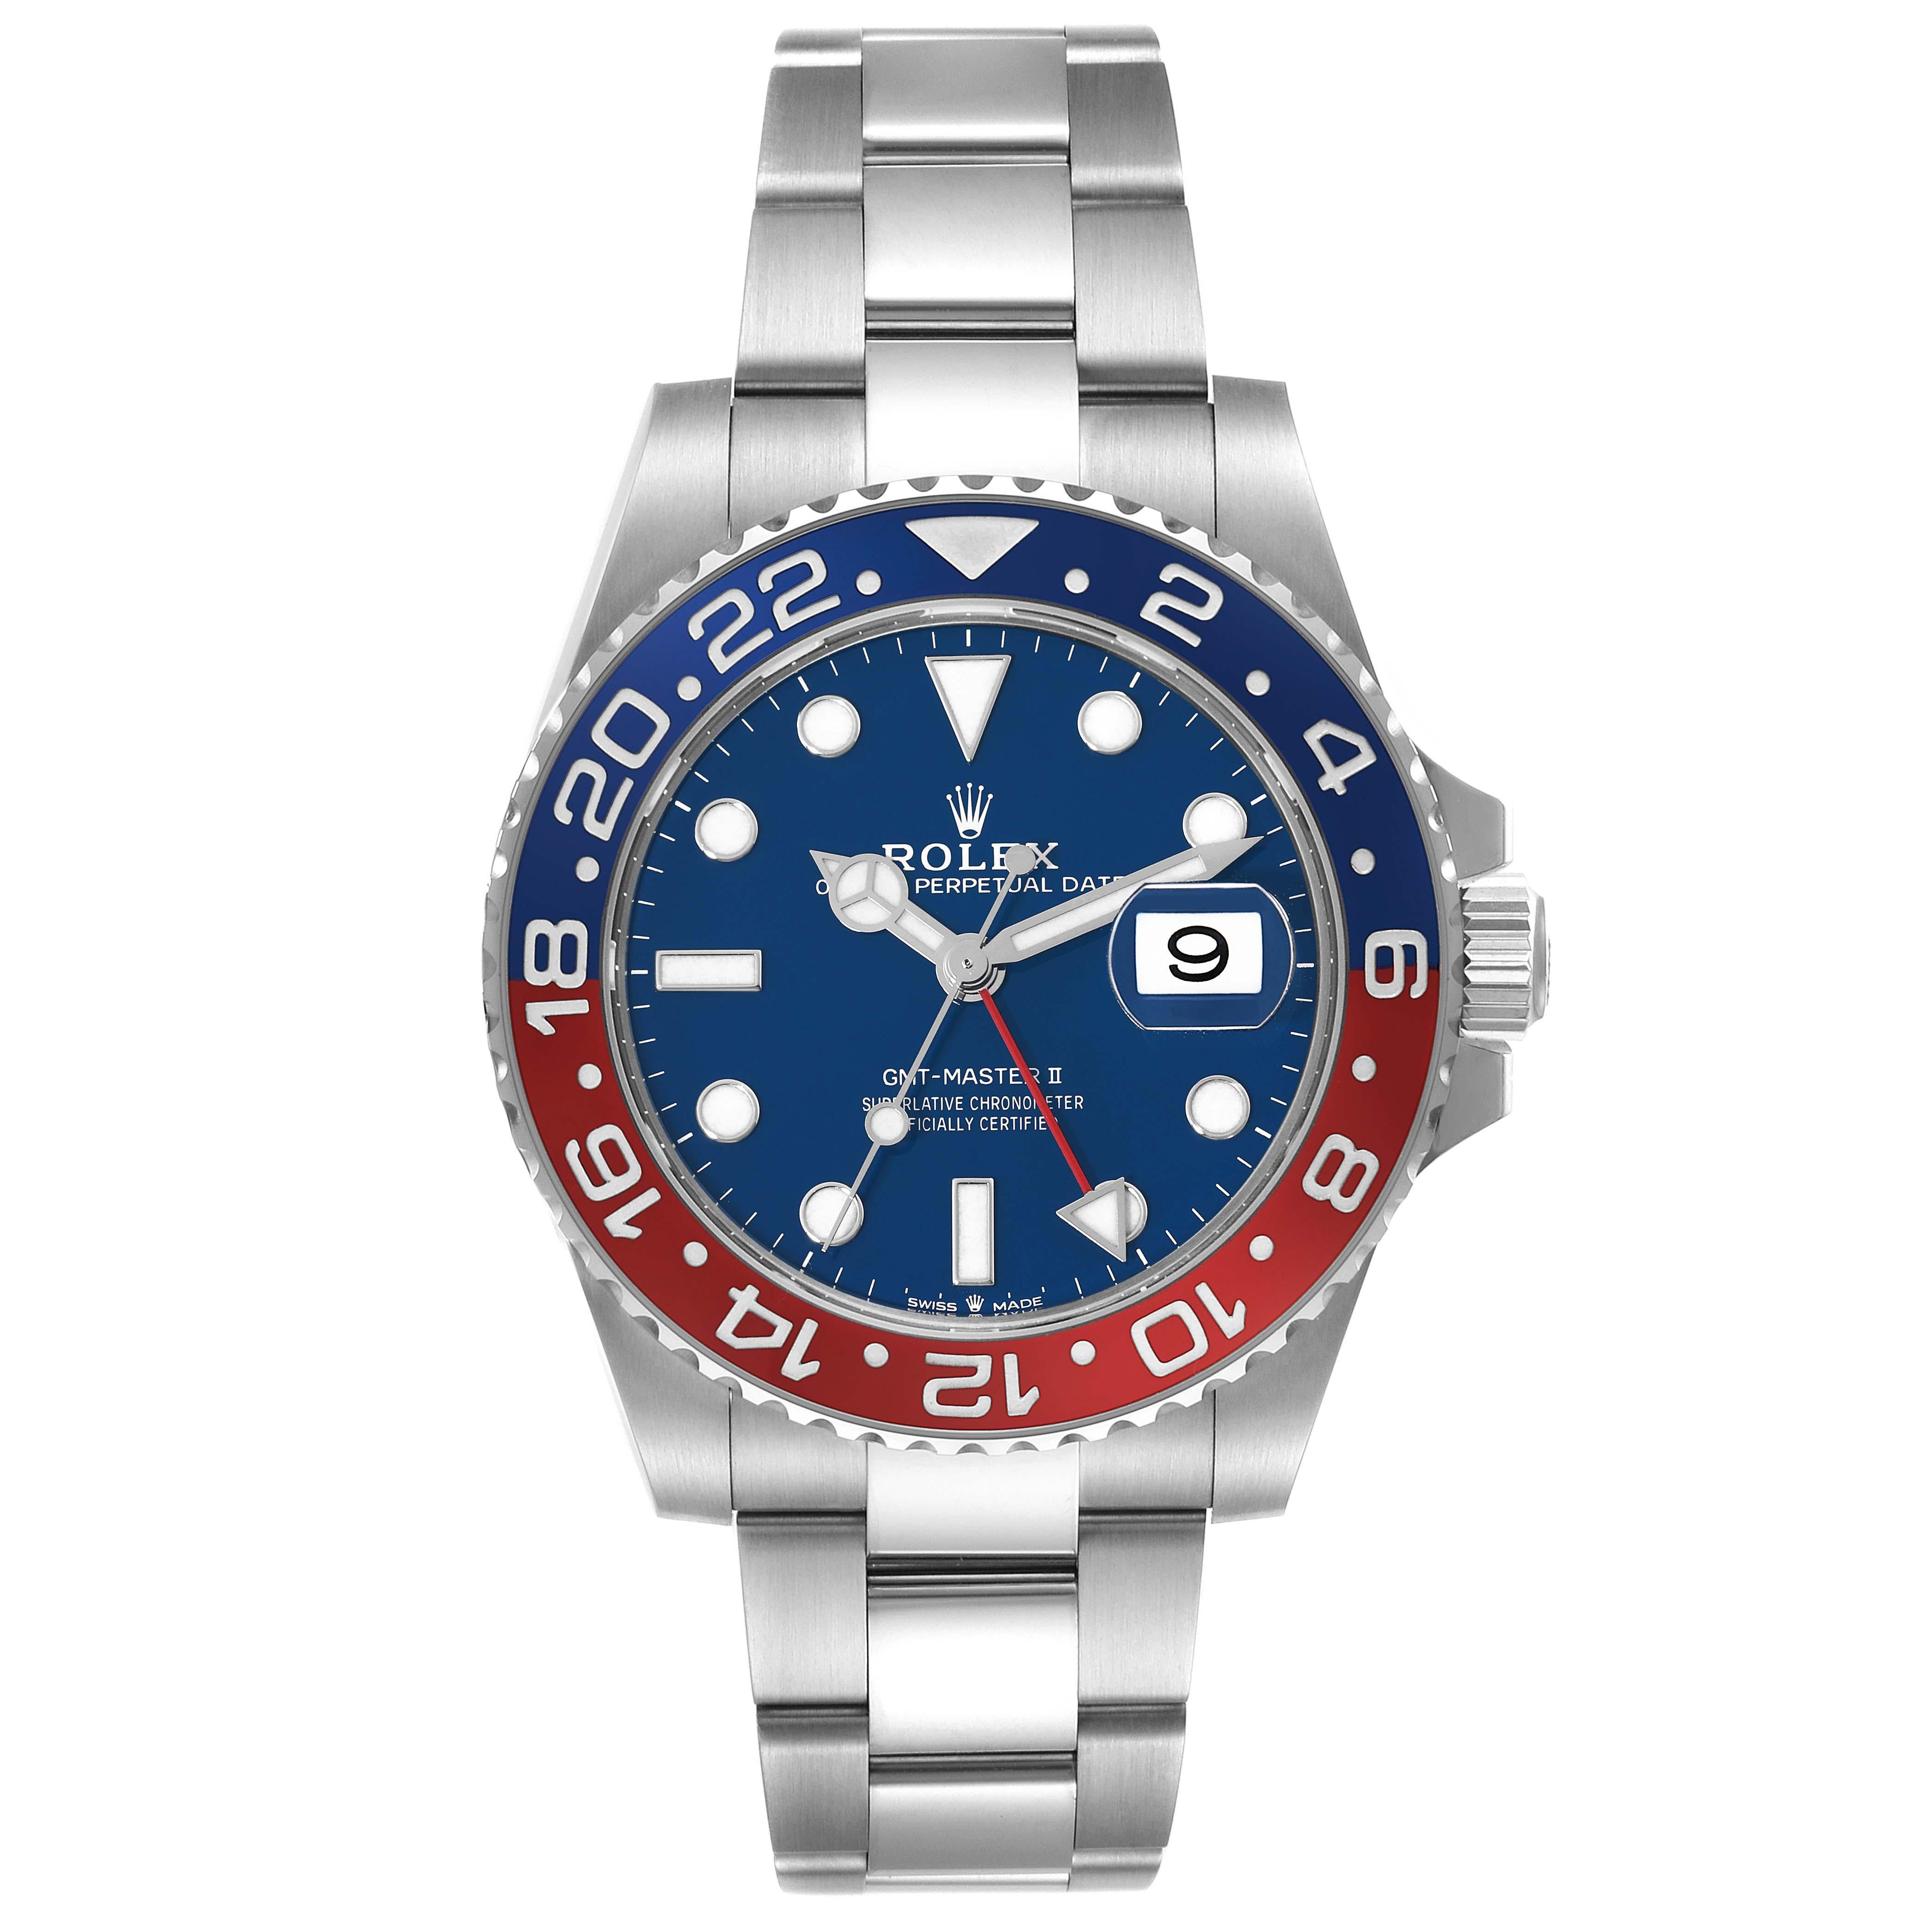 Rolex GMT Master II White Gold Pepsi Bezel Blue Dial Mens Watch 126719 Box Card. Officially certified chronometer automatic self-winding movement. 18k white gold case 40 mm in diameter. Rolex logo on a crown. 18k white gold bidirectional rotating